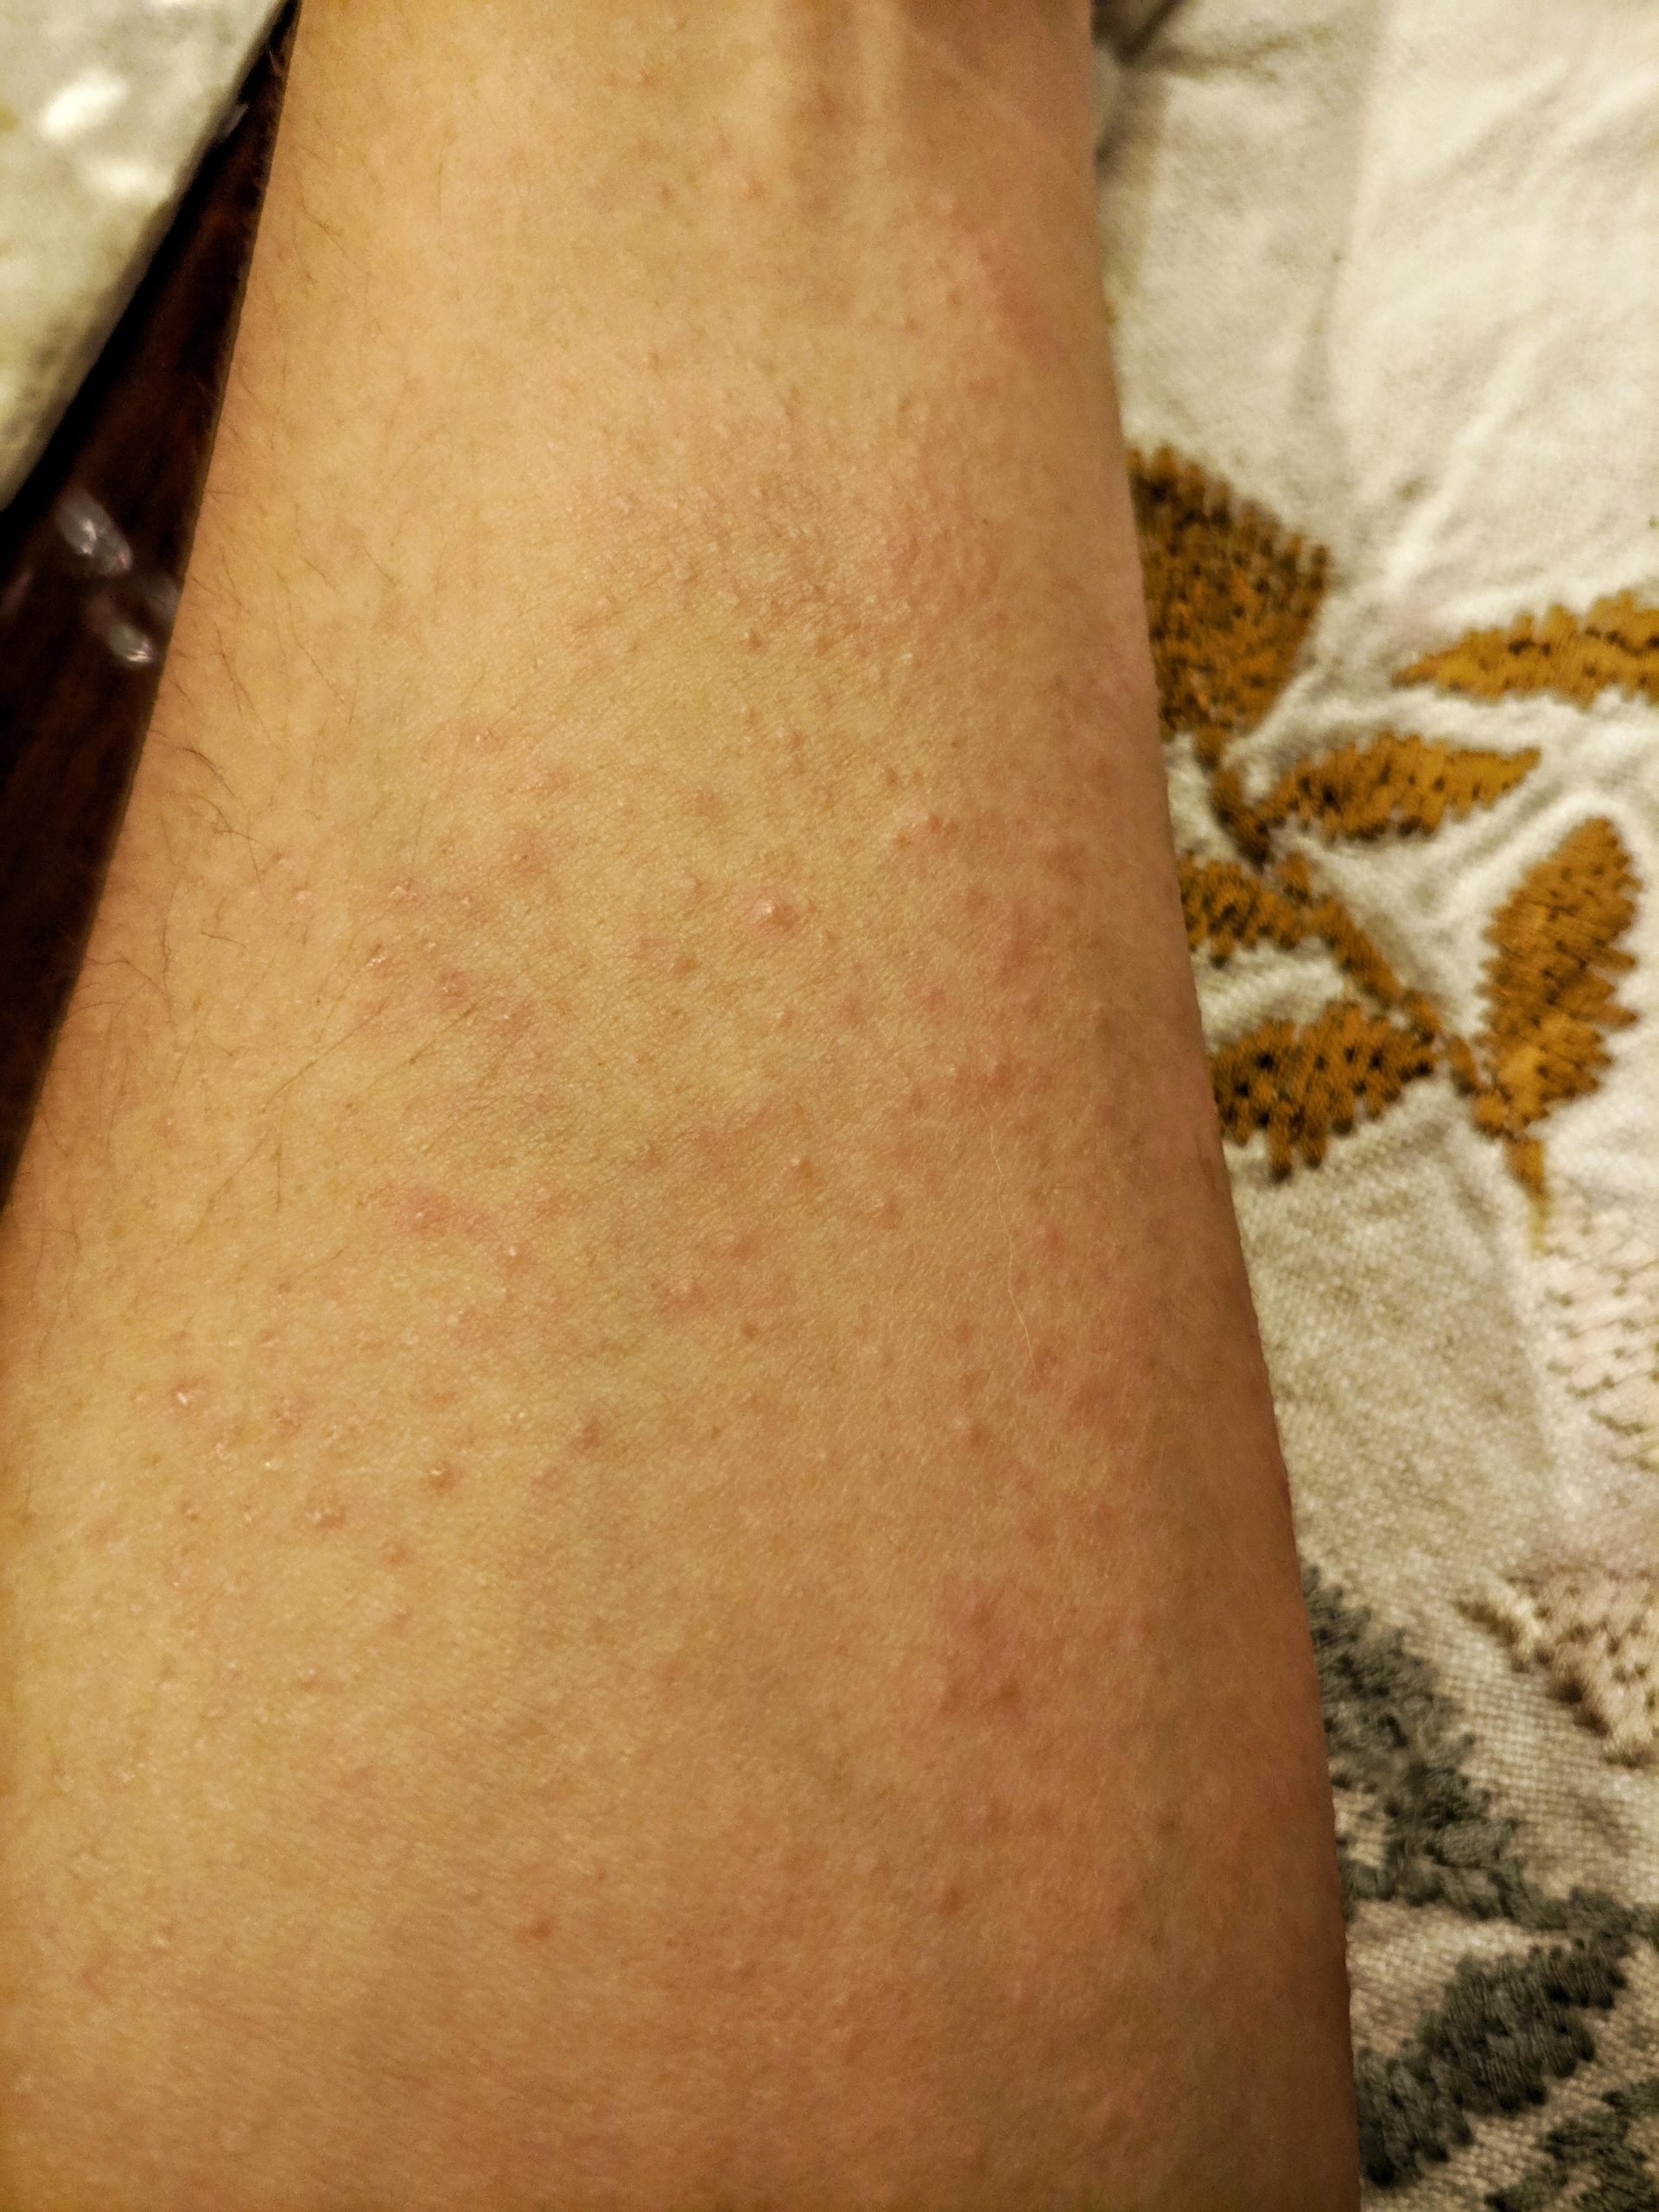 Erythrodermic Psoriasis, can anyone give me any advise what to do, like ...